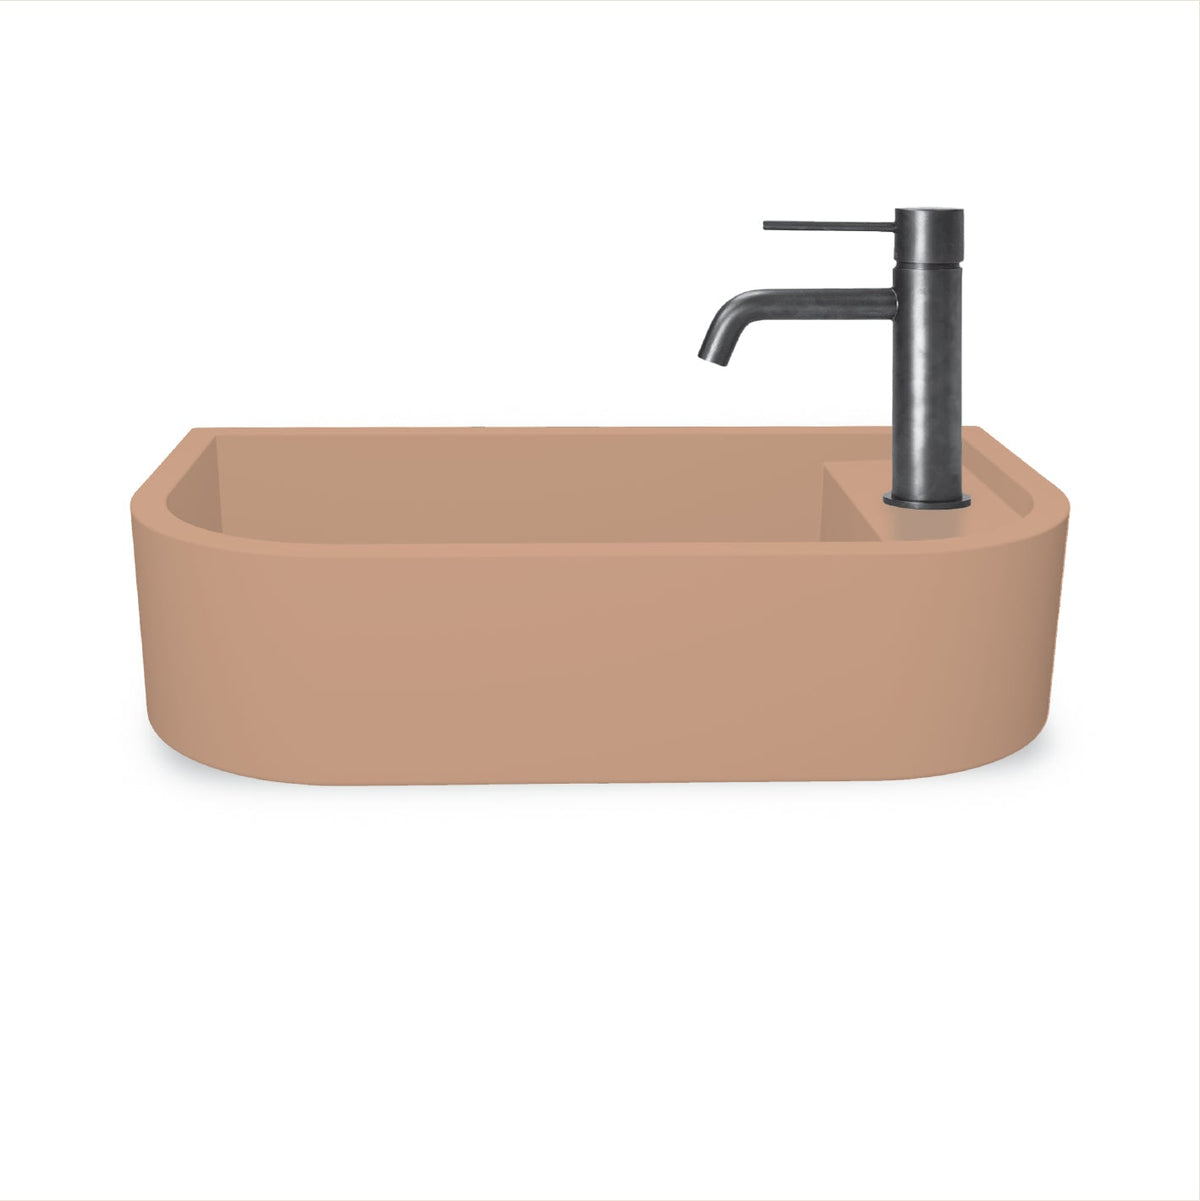 Loop 02 Basin - Overflow - Wall Hung (Pastel Peach,Tap Hole,White)